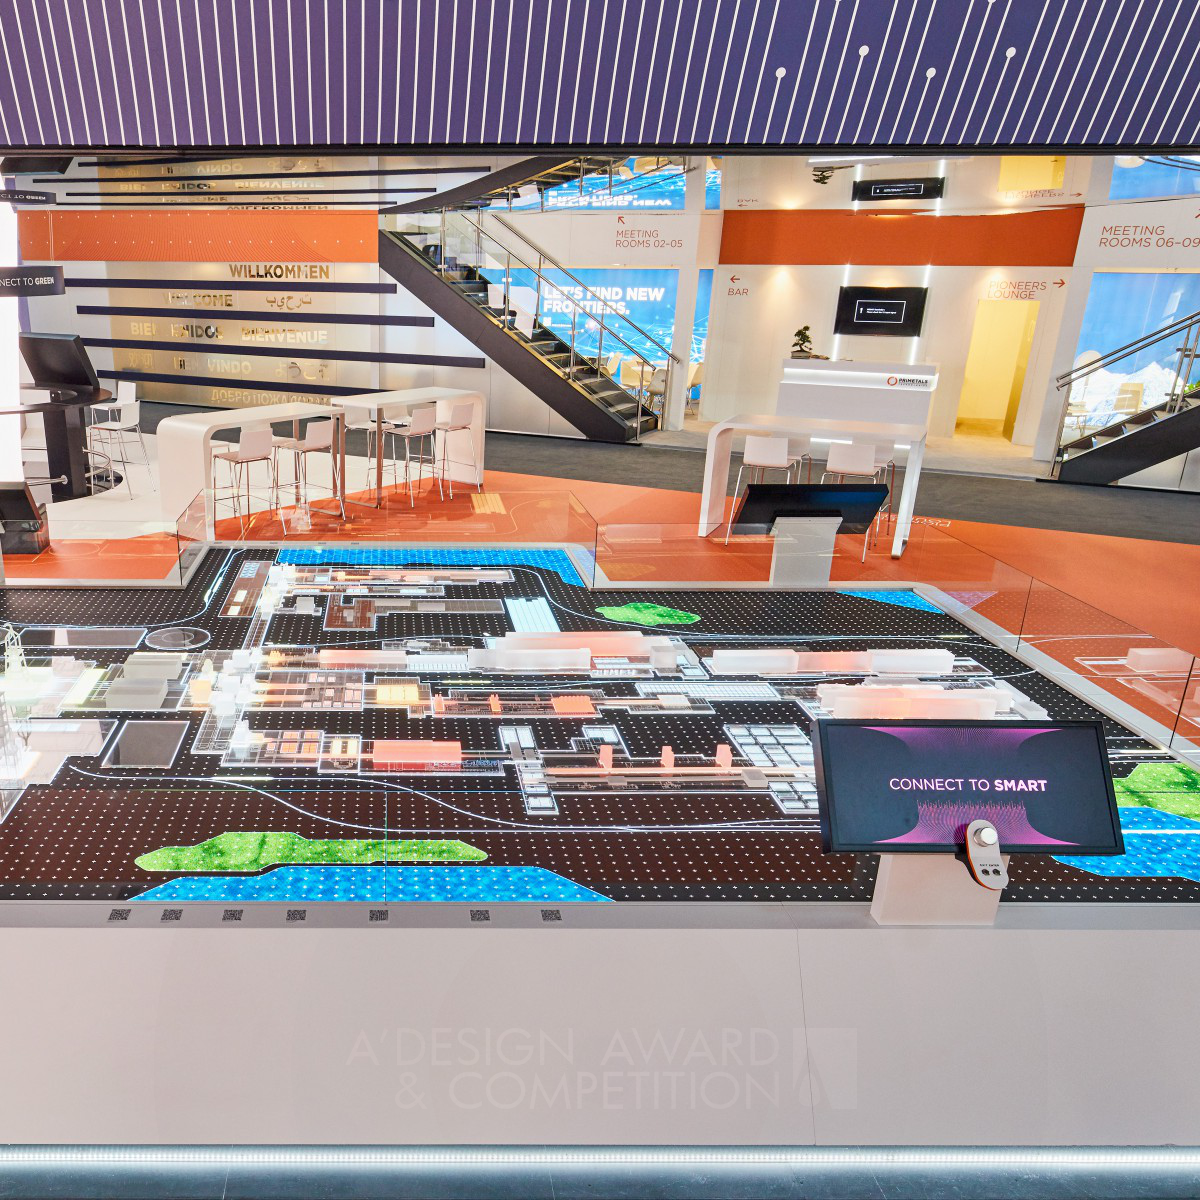 Steel City Tradeshow Highlight by Responsive Spaces Silver Interface, Interaction and User Experience Design Award Winner 2020 